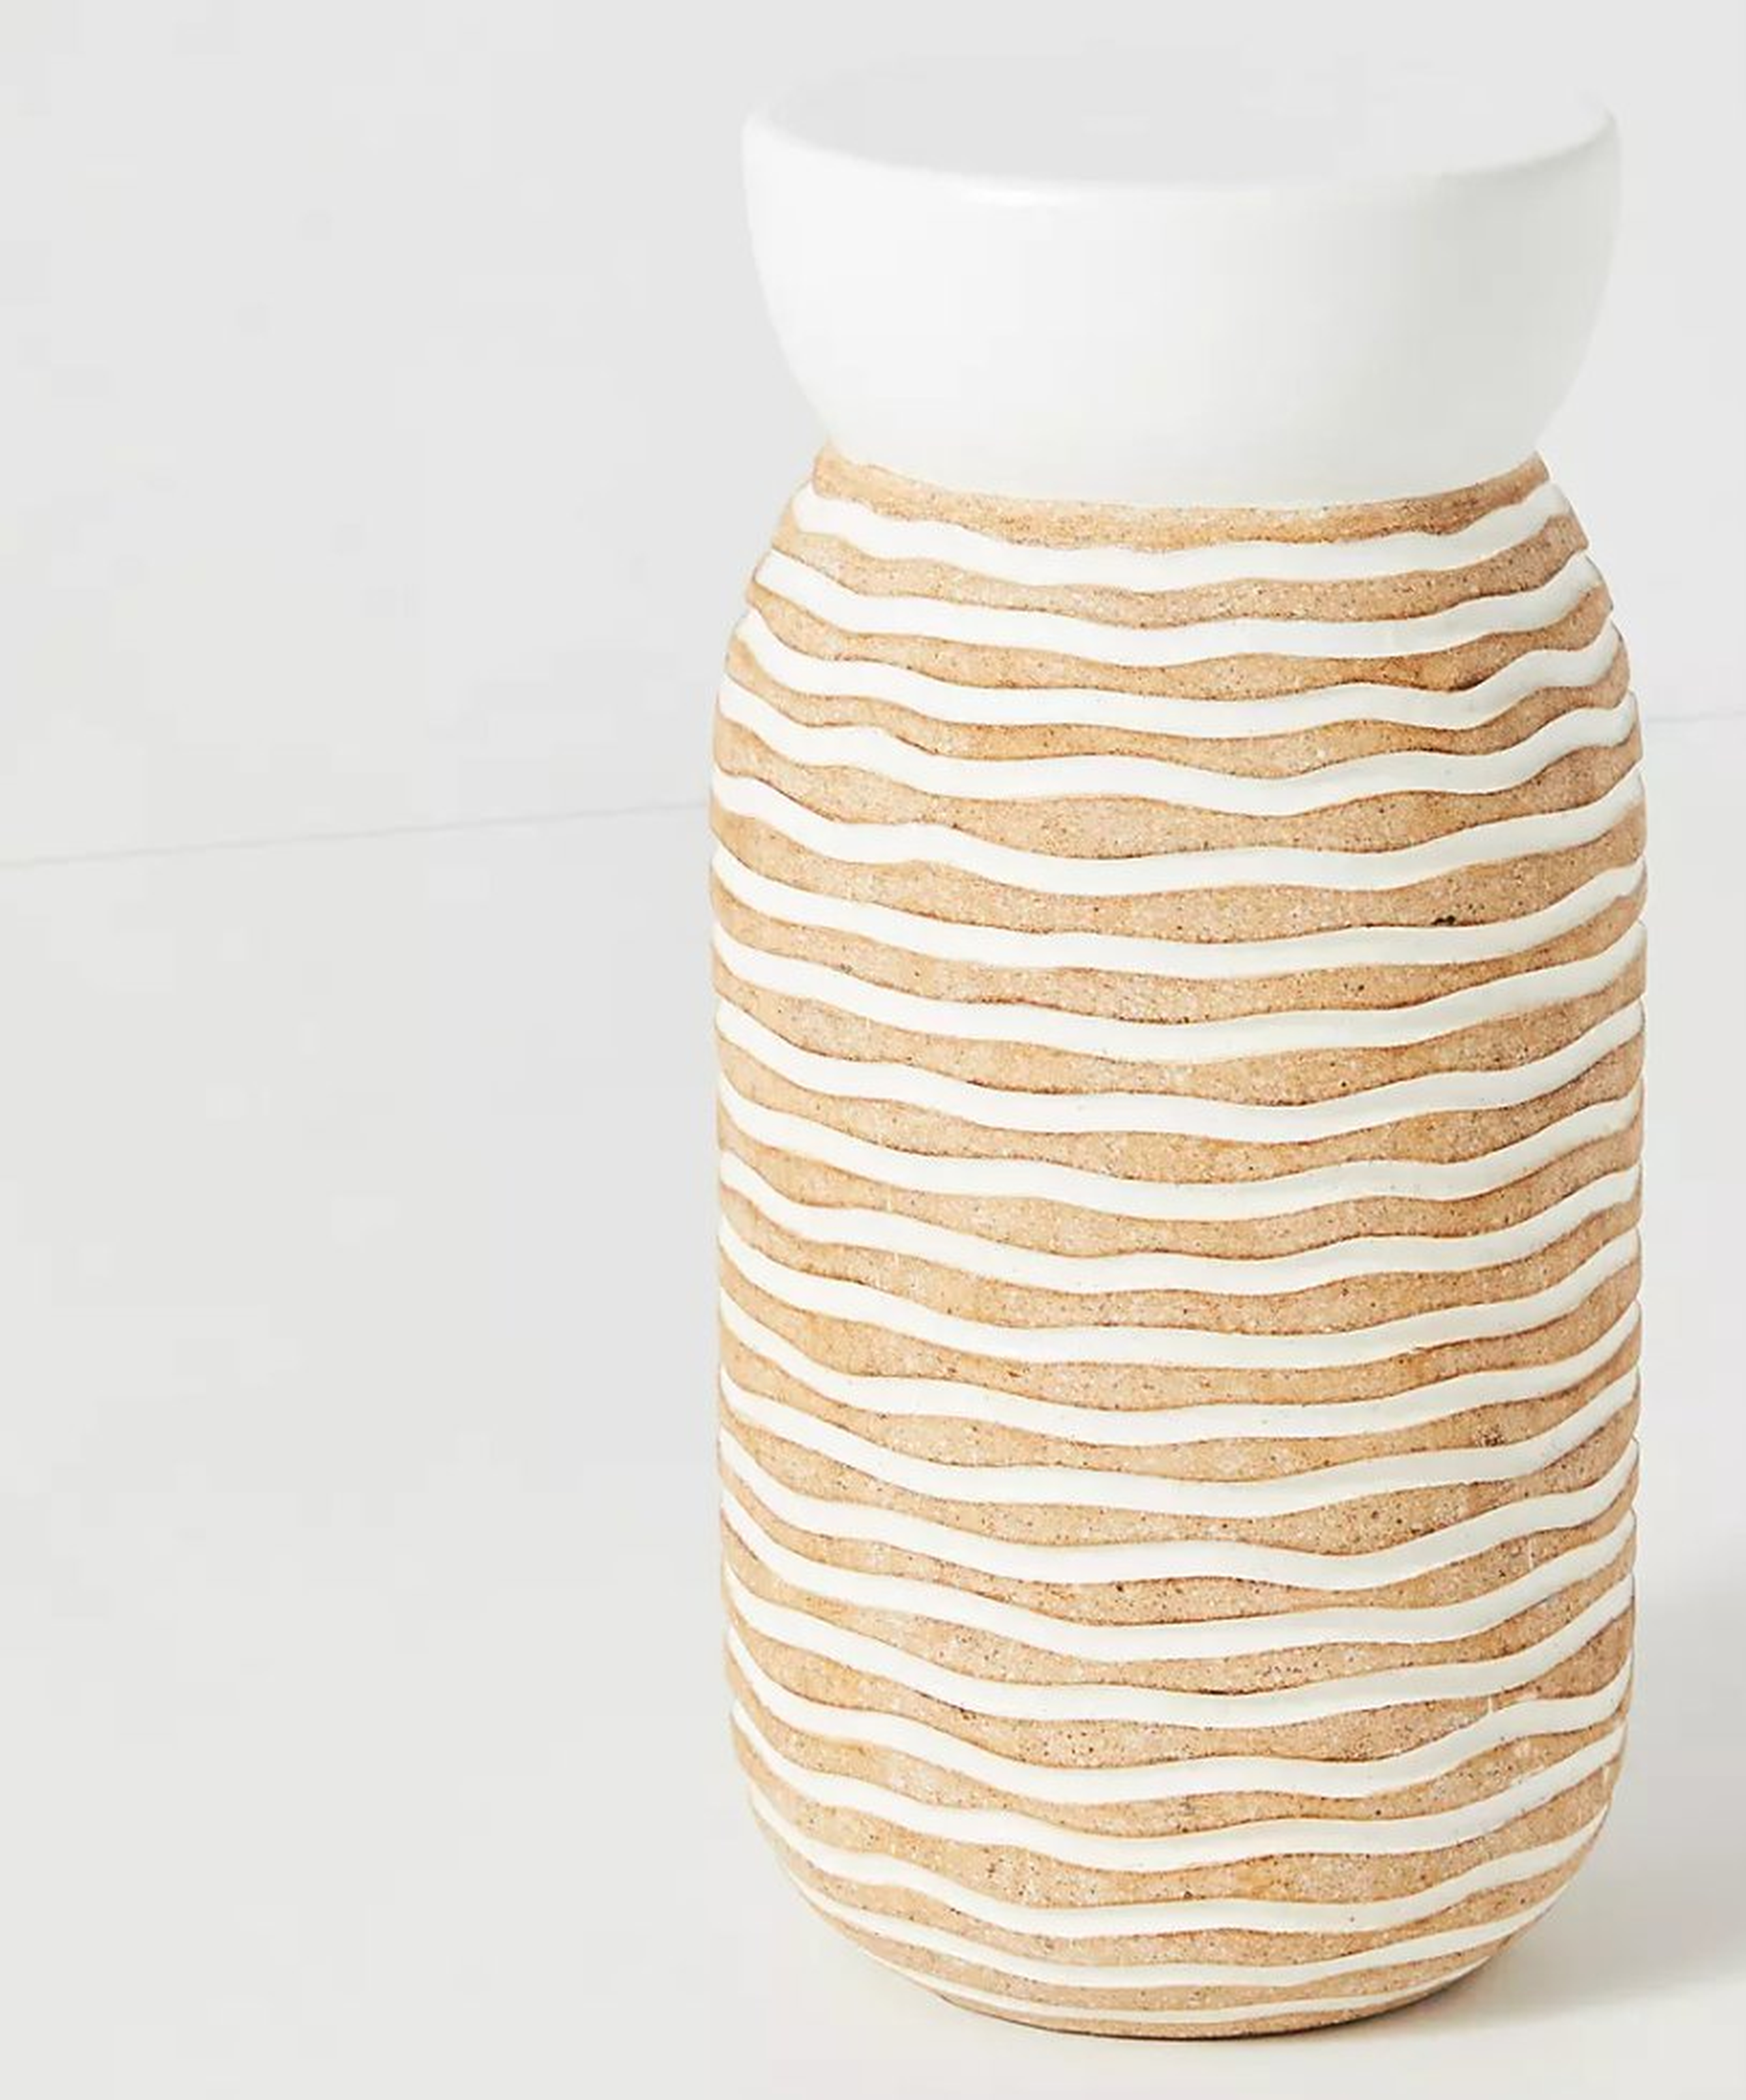 Tidal Stripe Side Table By Anthropologie in White - Anthropologie